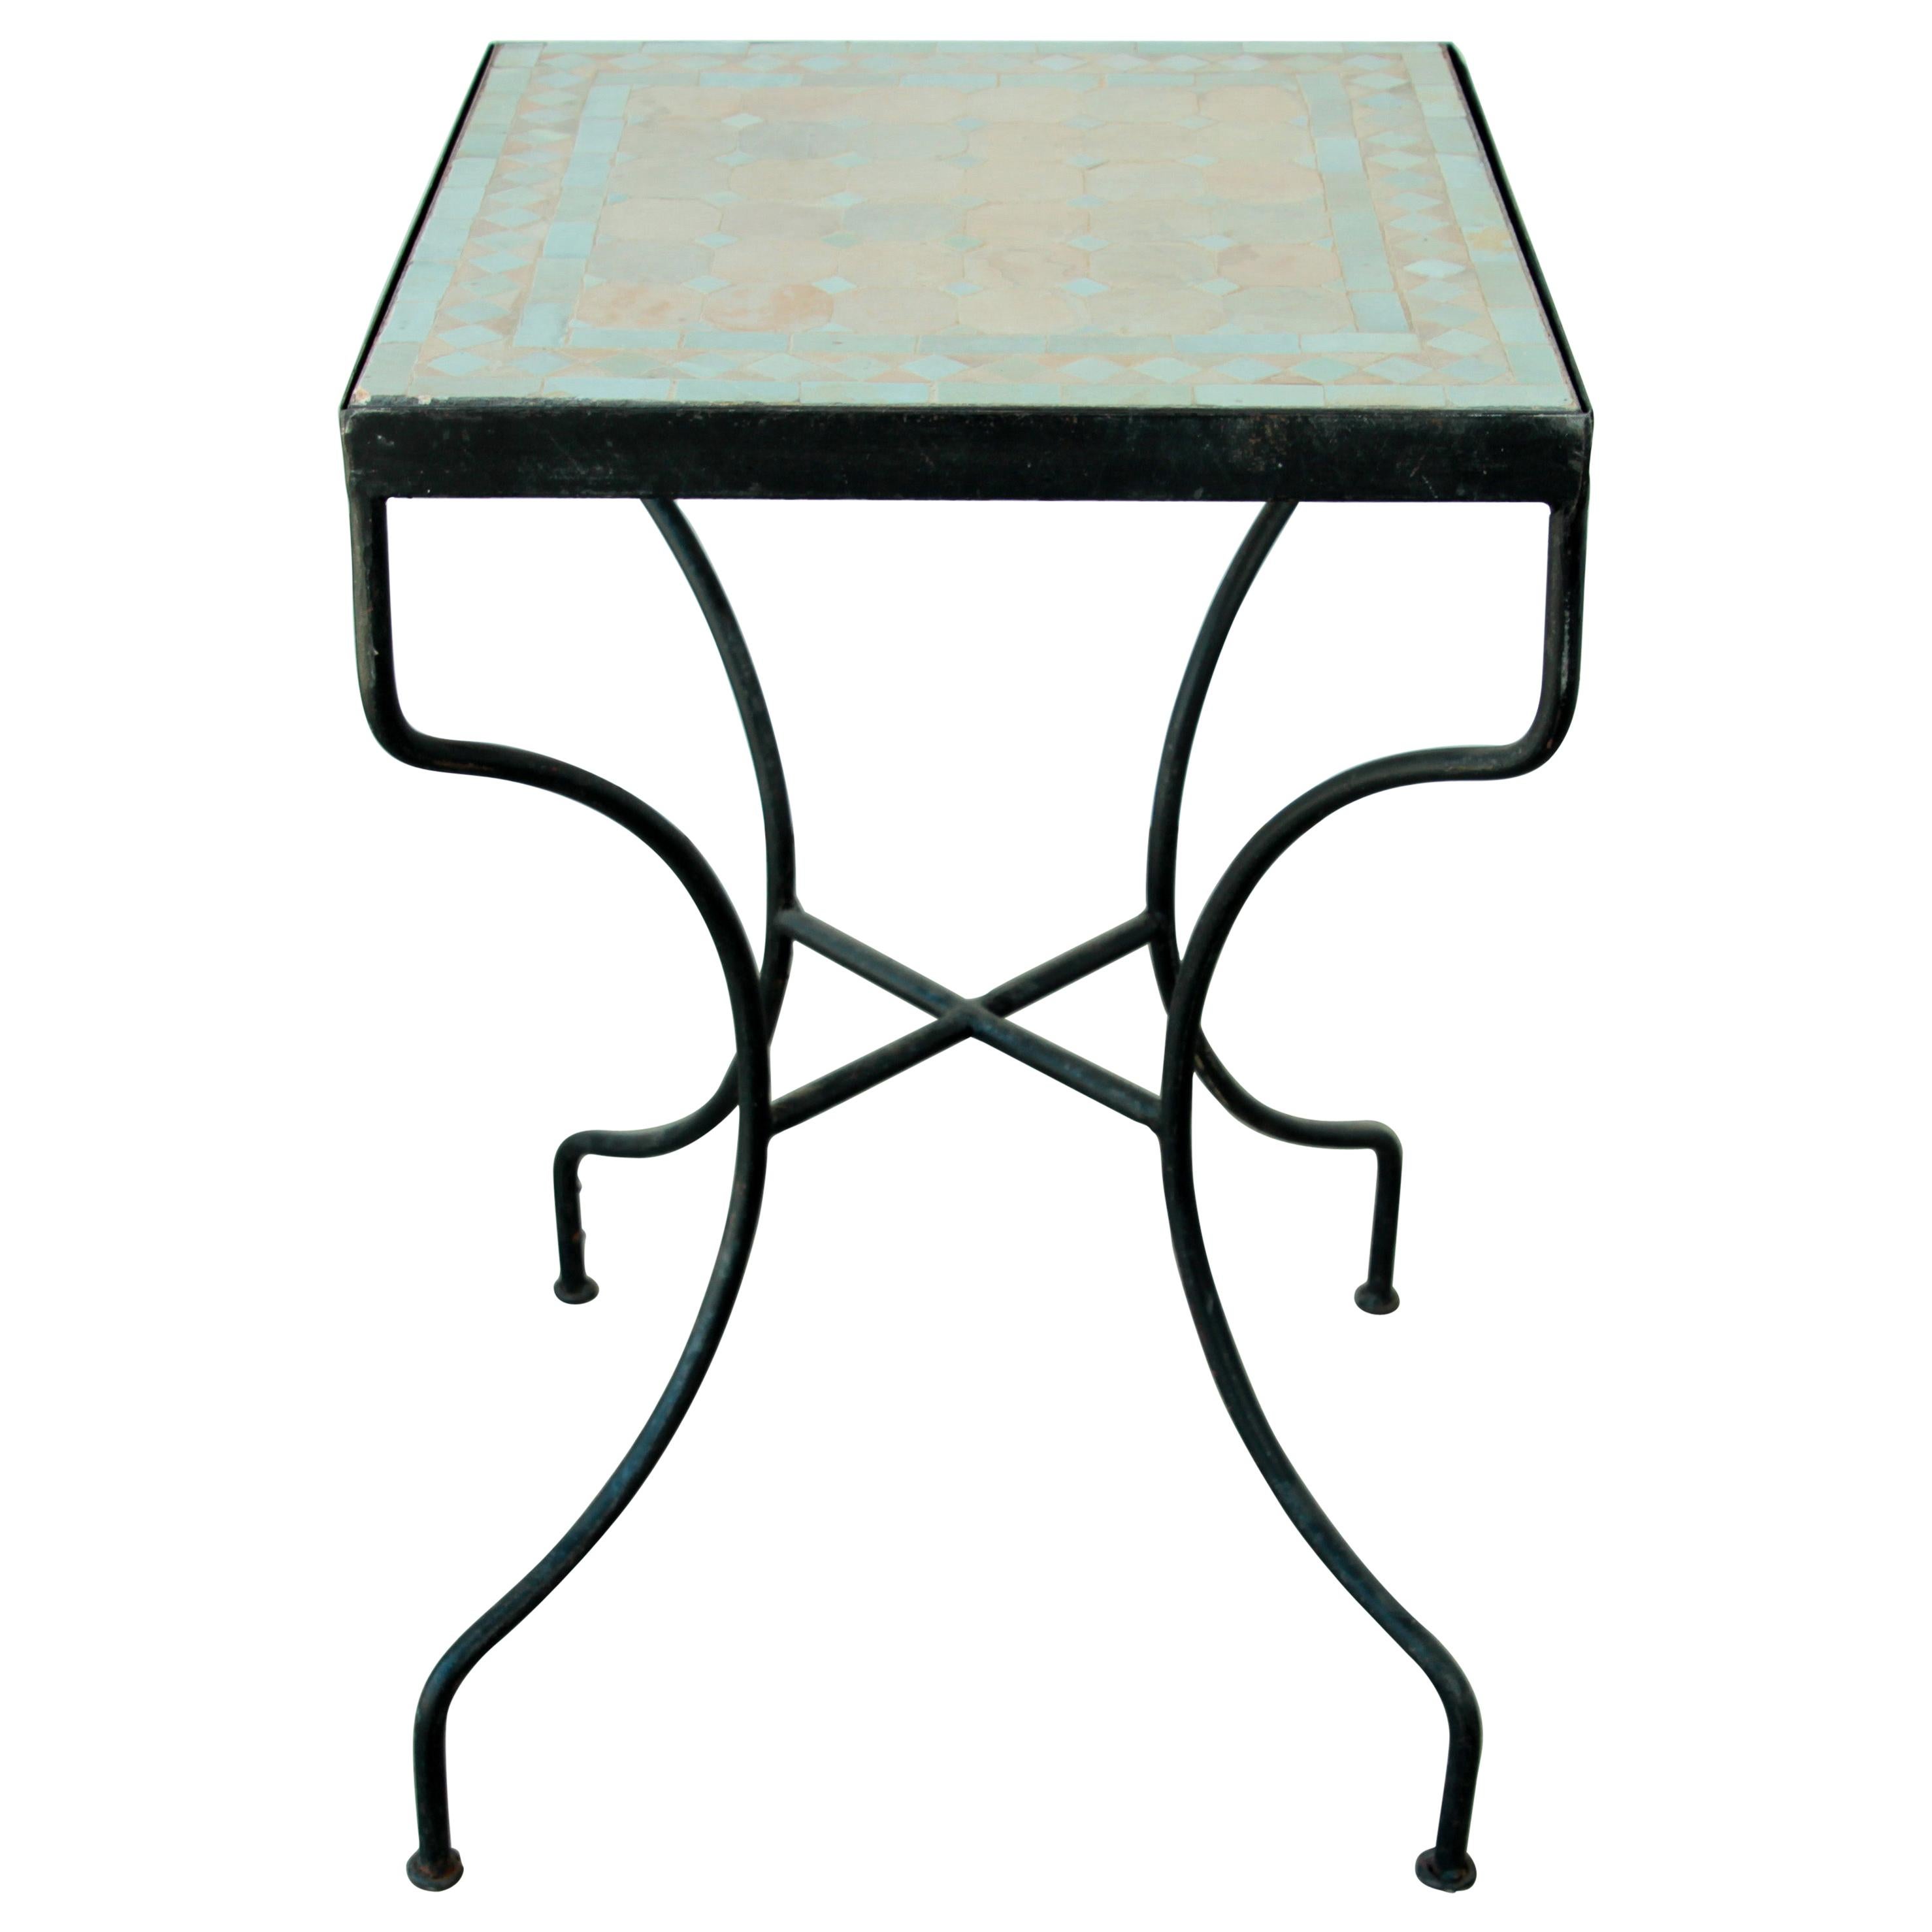 Moroccan Mosaic Tile Bistro Table For Sale